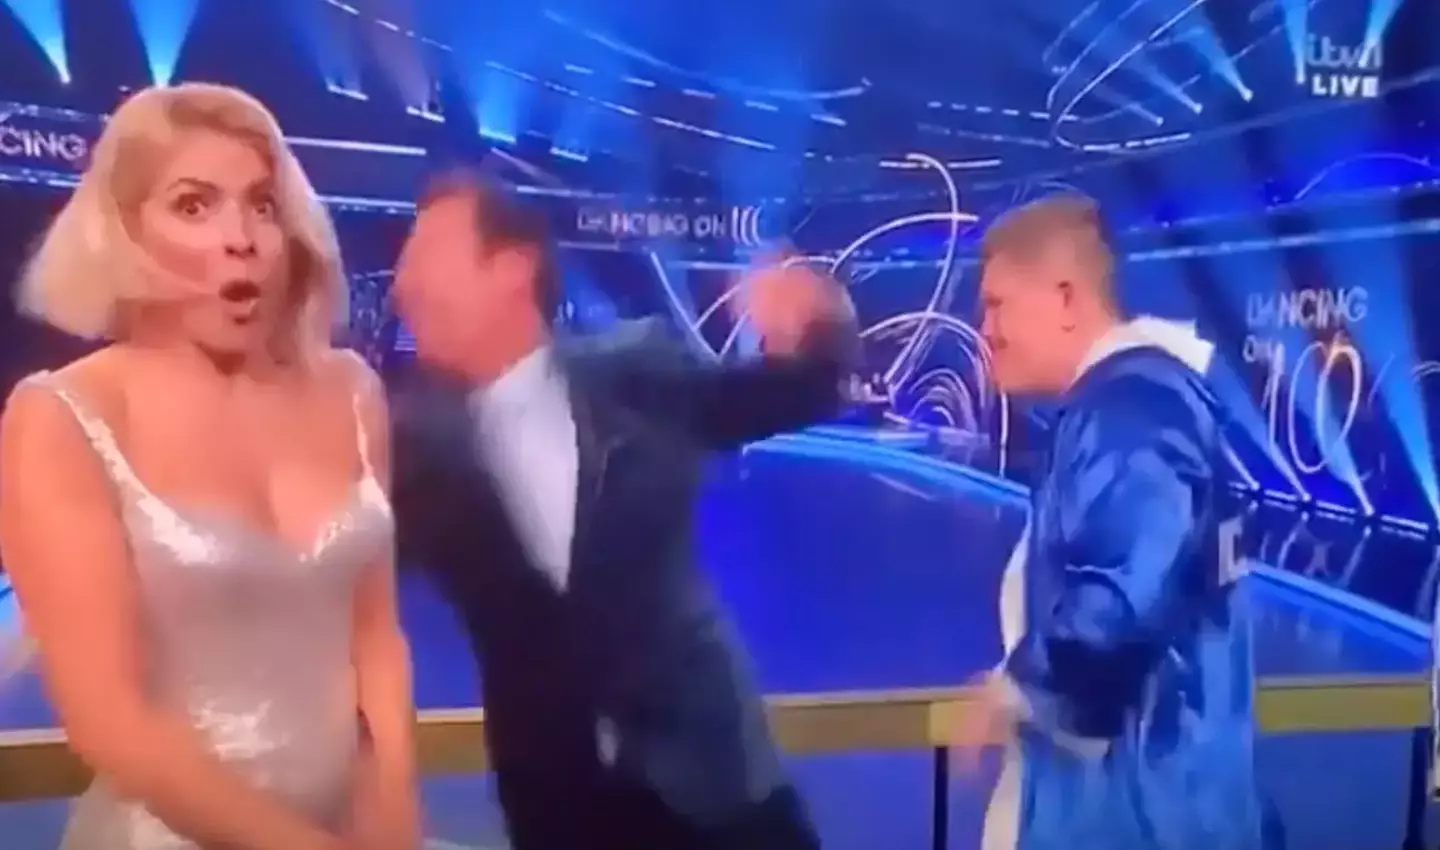 Ricky Hatton landed a blow to Stephen Mulhern's arm on Dancing on Ice.